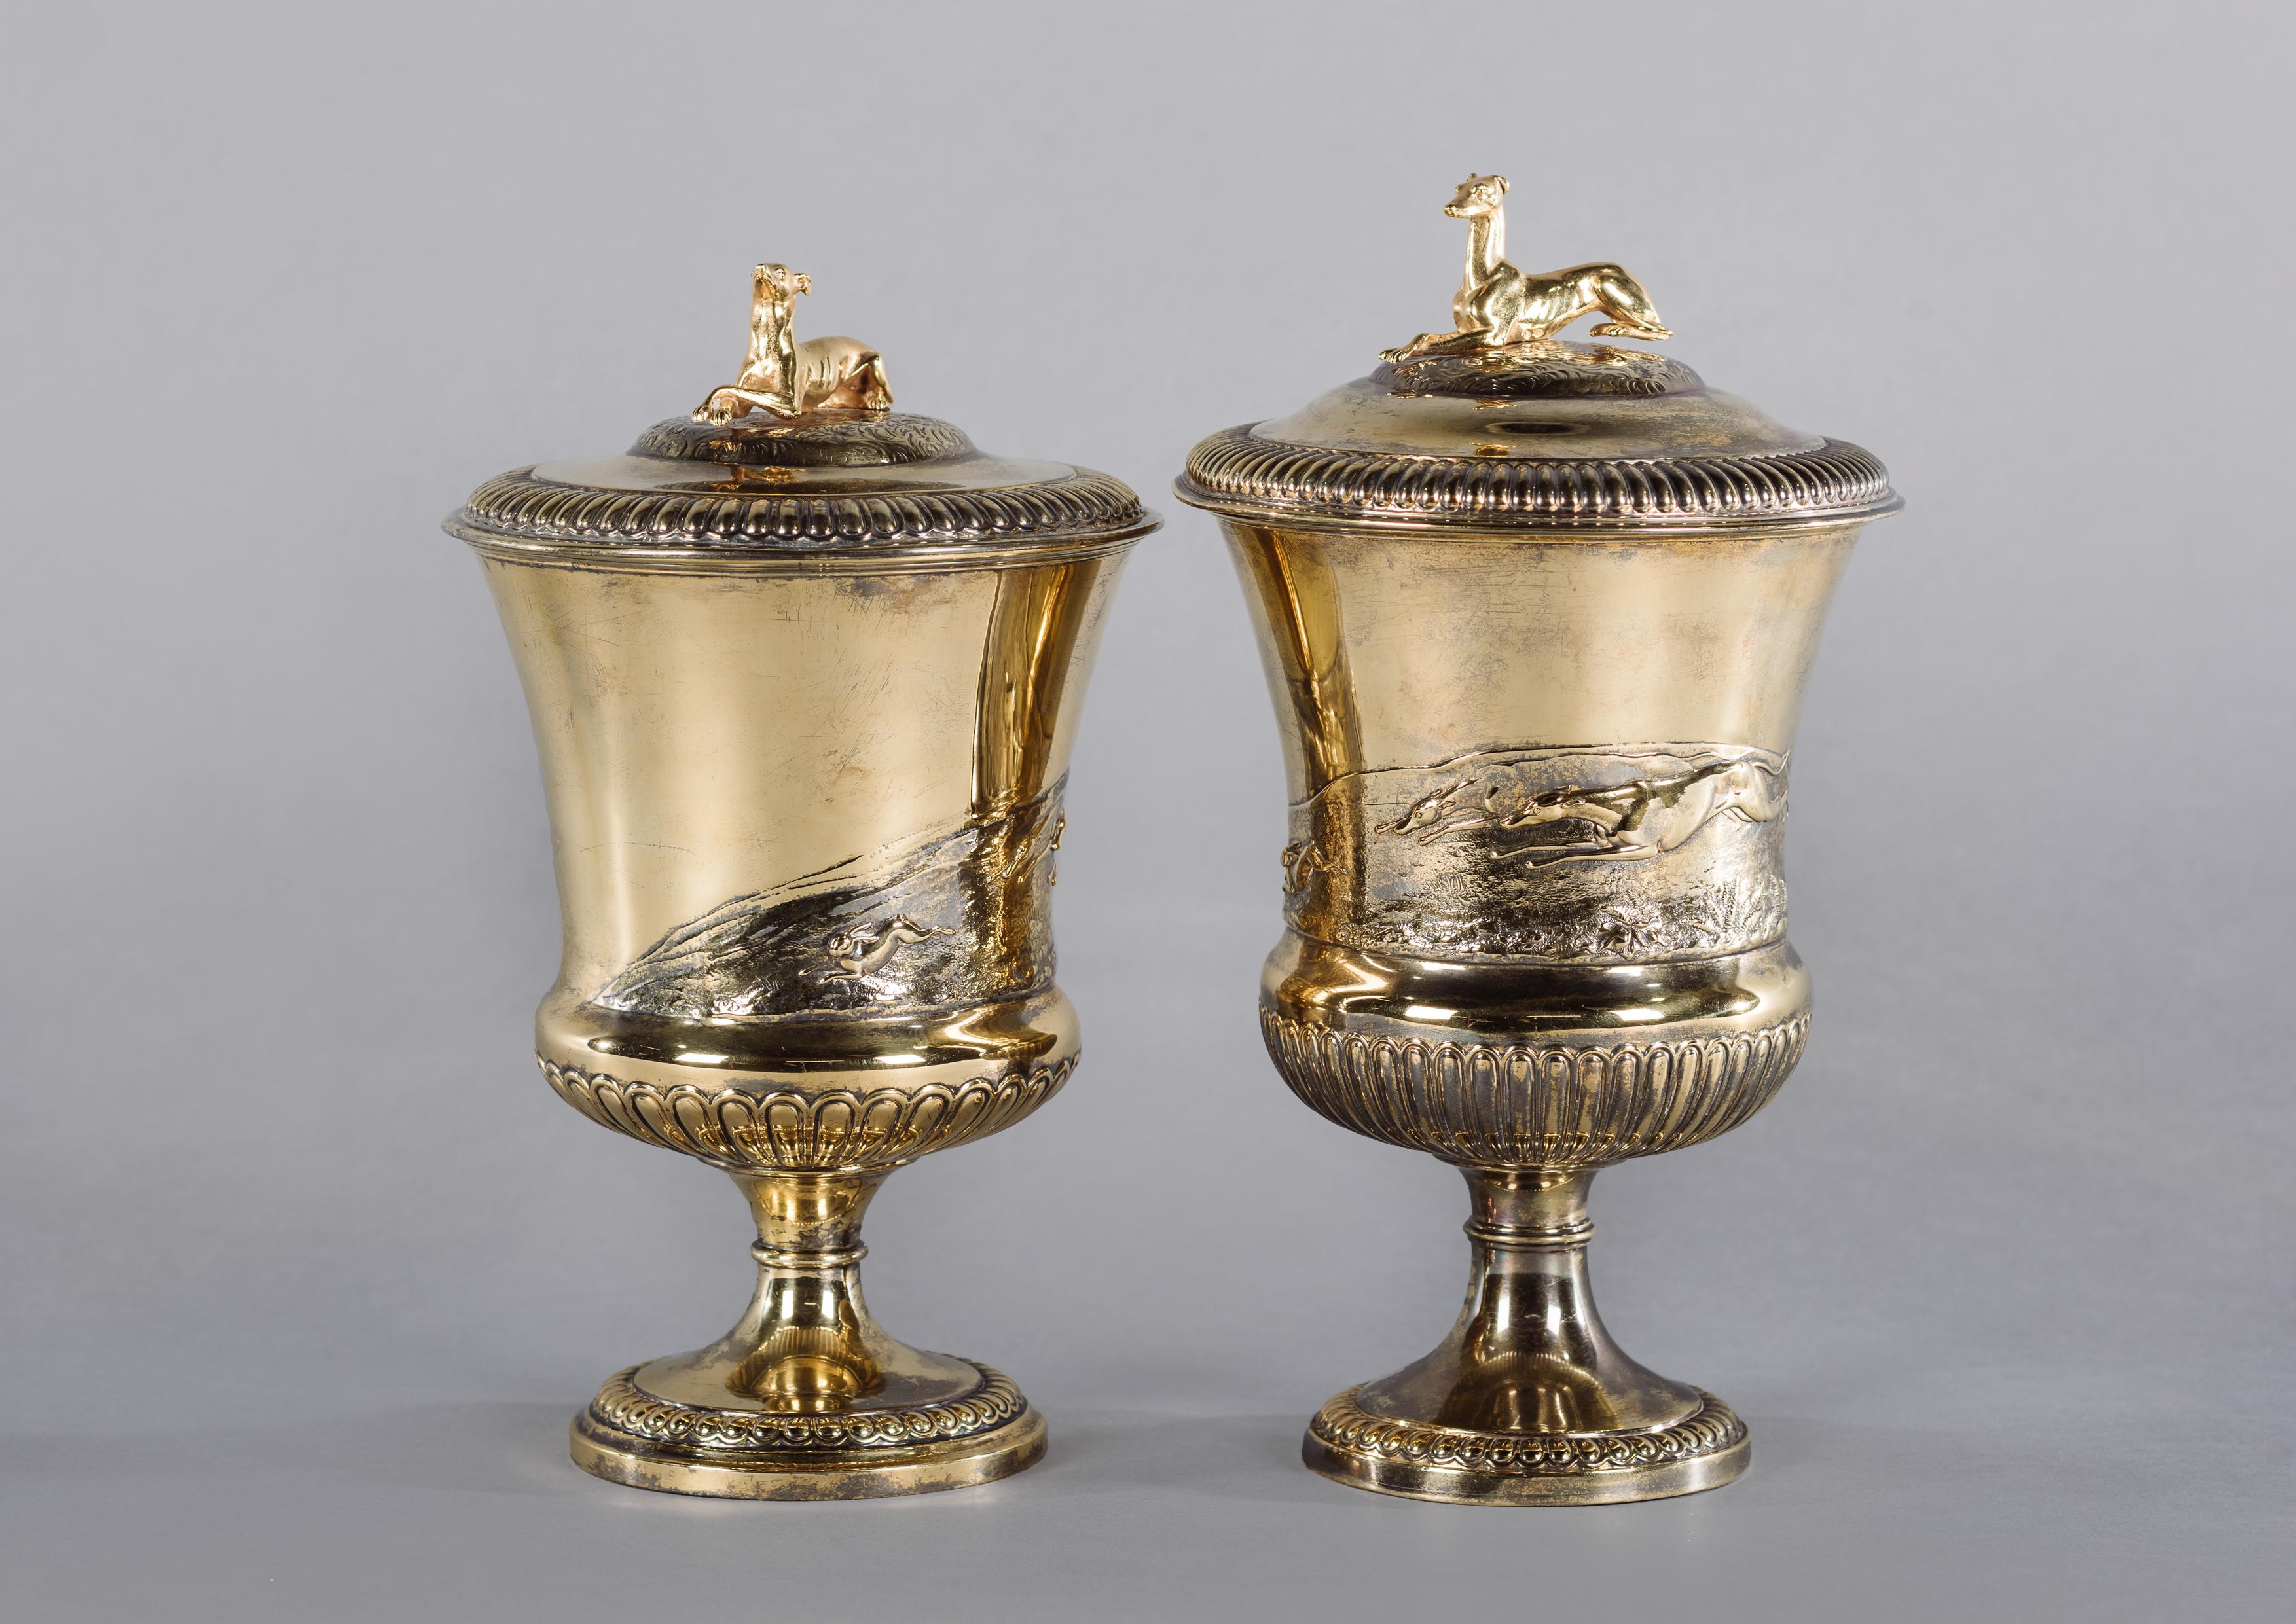 An unusual pair of George IV silver-gilt cup and covers by John Bridge for Rundell, Bridge & Rundell.

English, circa 1824-1826. 

Hallmarks for Rundell, Bridge & Rundell, London, 1824-1826. 

Each cup has a lobed circular foot, with a